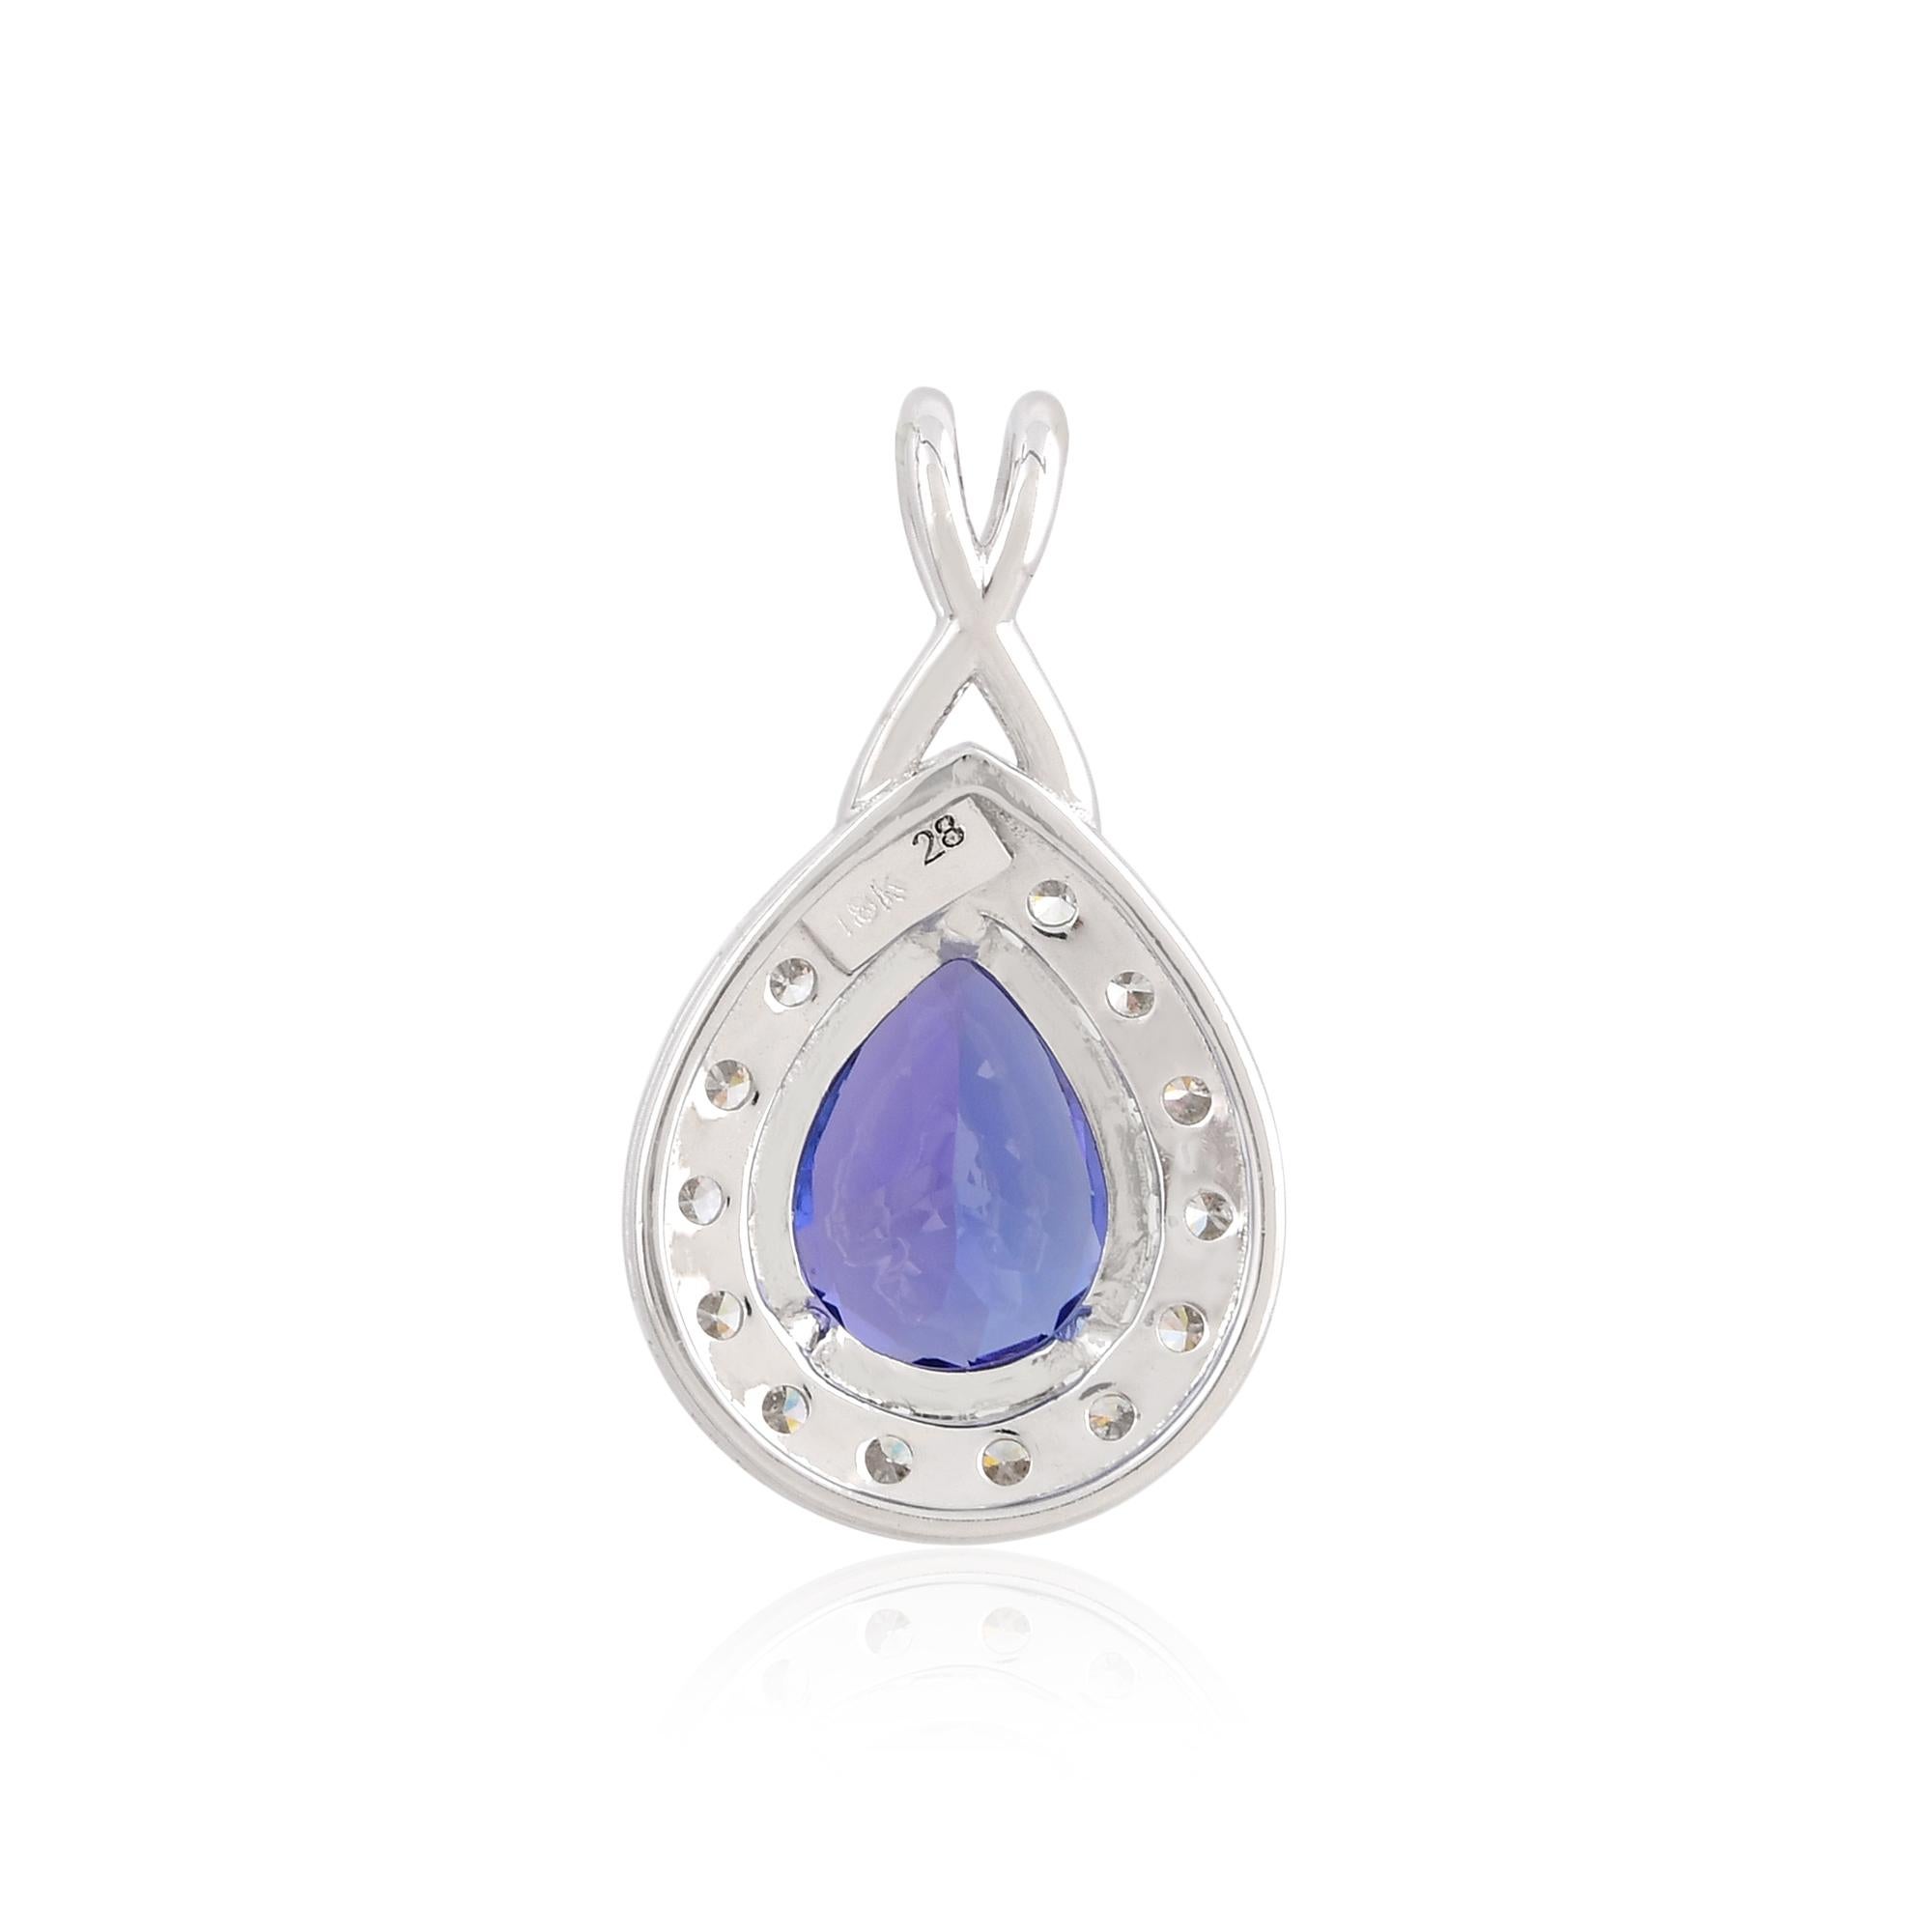 Indulge in the enchanting beauty of this pear-shaped tanzanite gemstone charm pendant, adorned with a diamond pave setting, and expertly crafted in 18 karat white gold. This pendant exudes elegance, sophistication, and a touch of whimsical